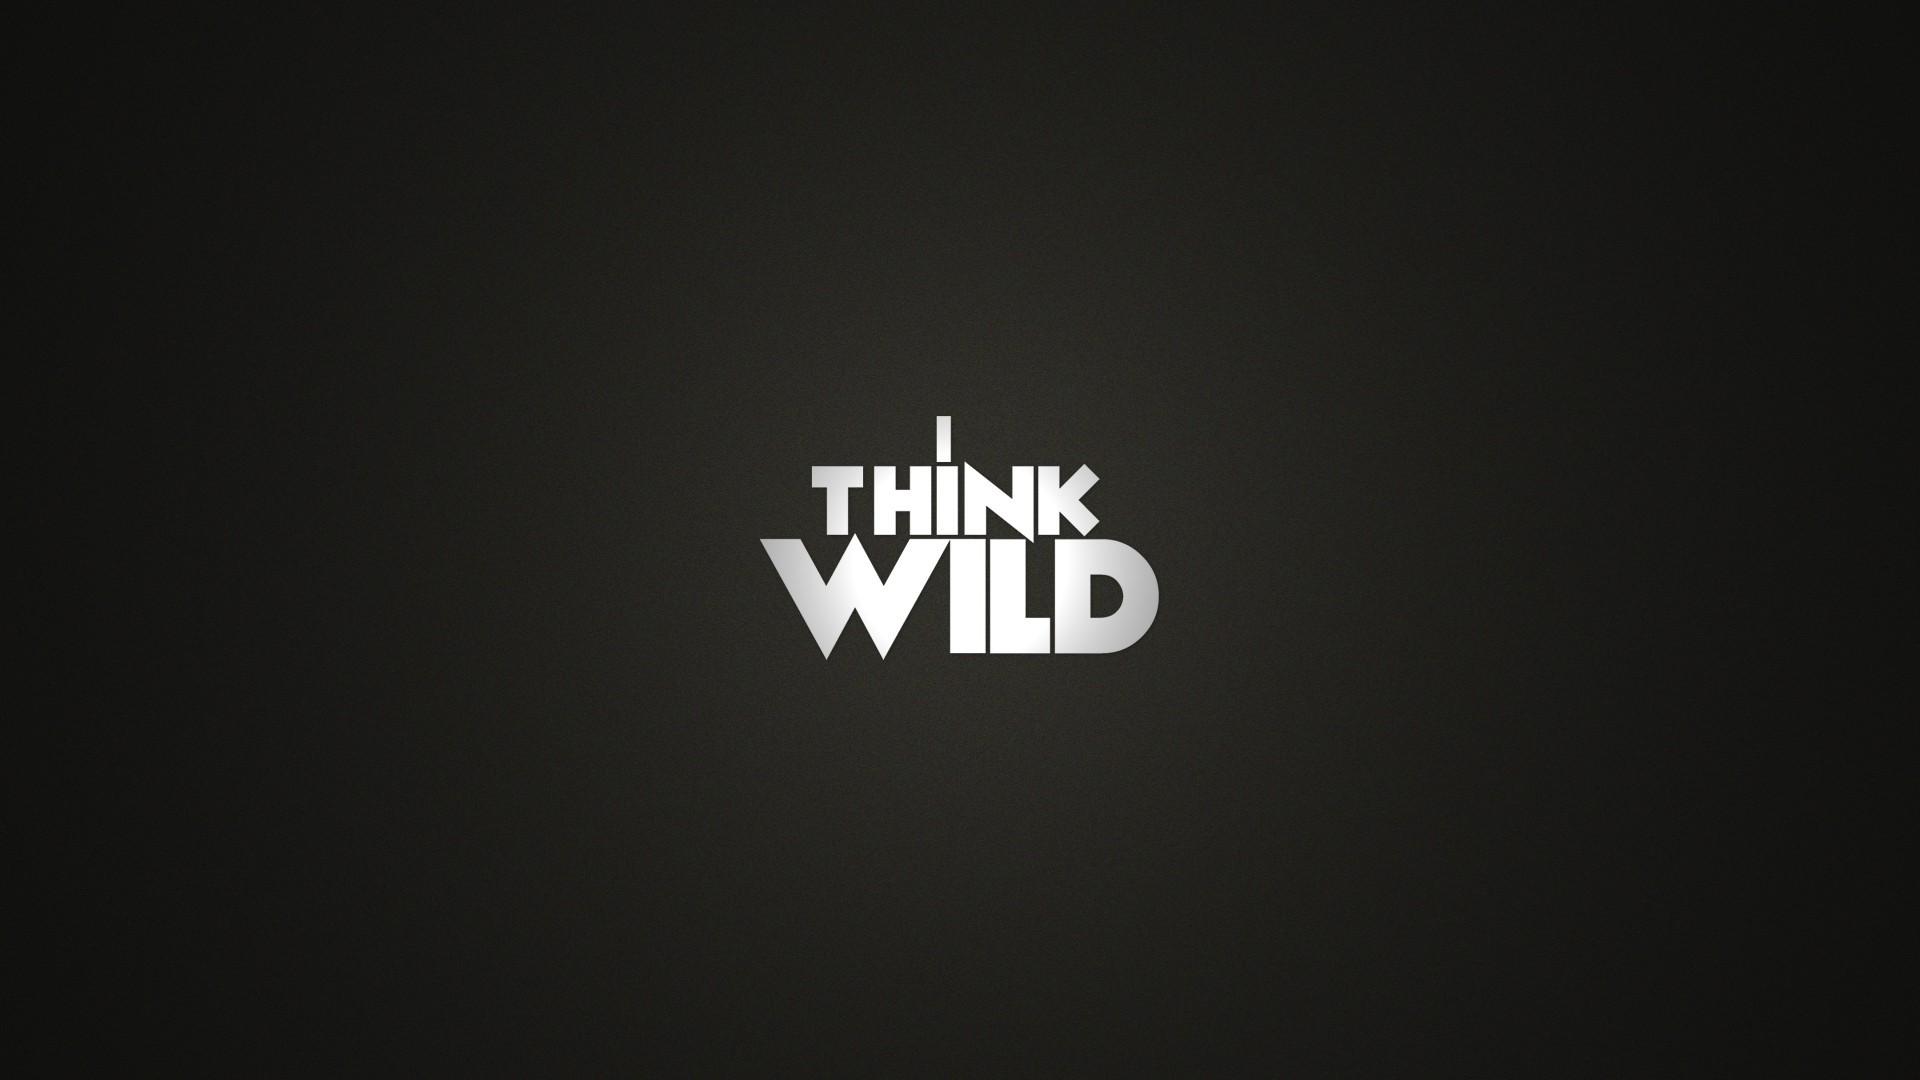 General 1920x1080 quote minimalism typography simple background black background